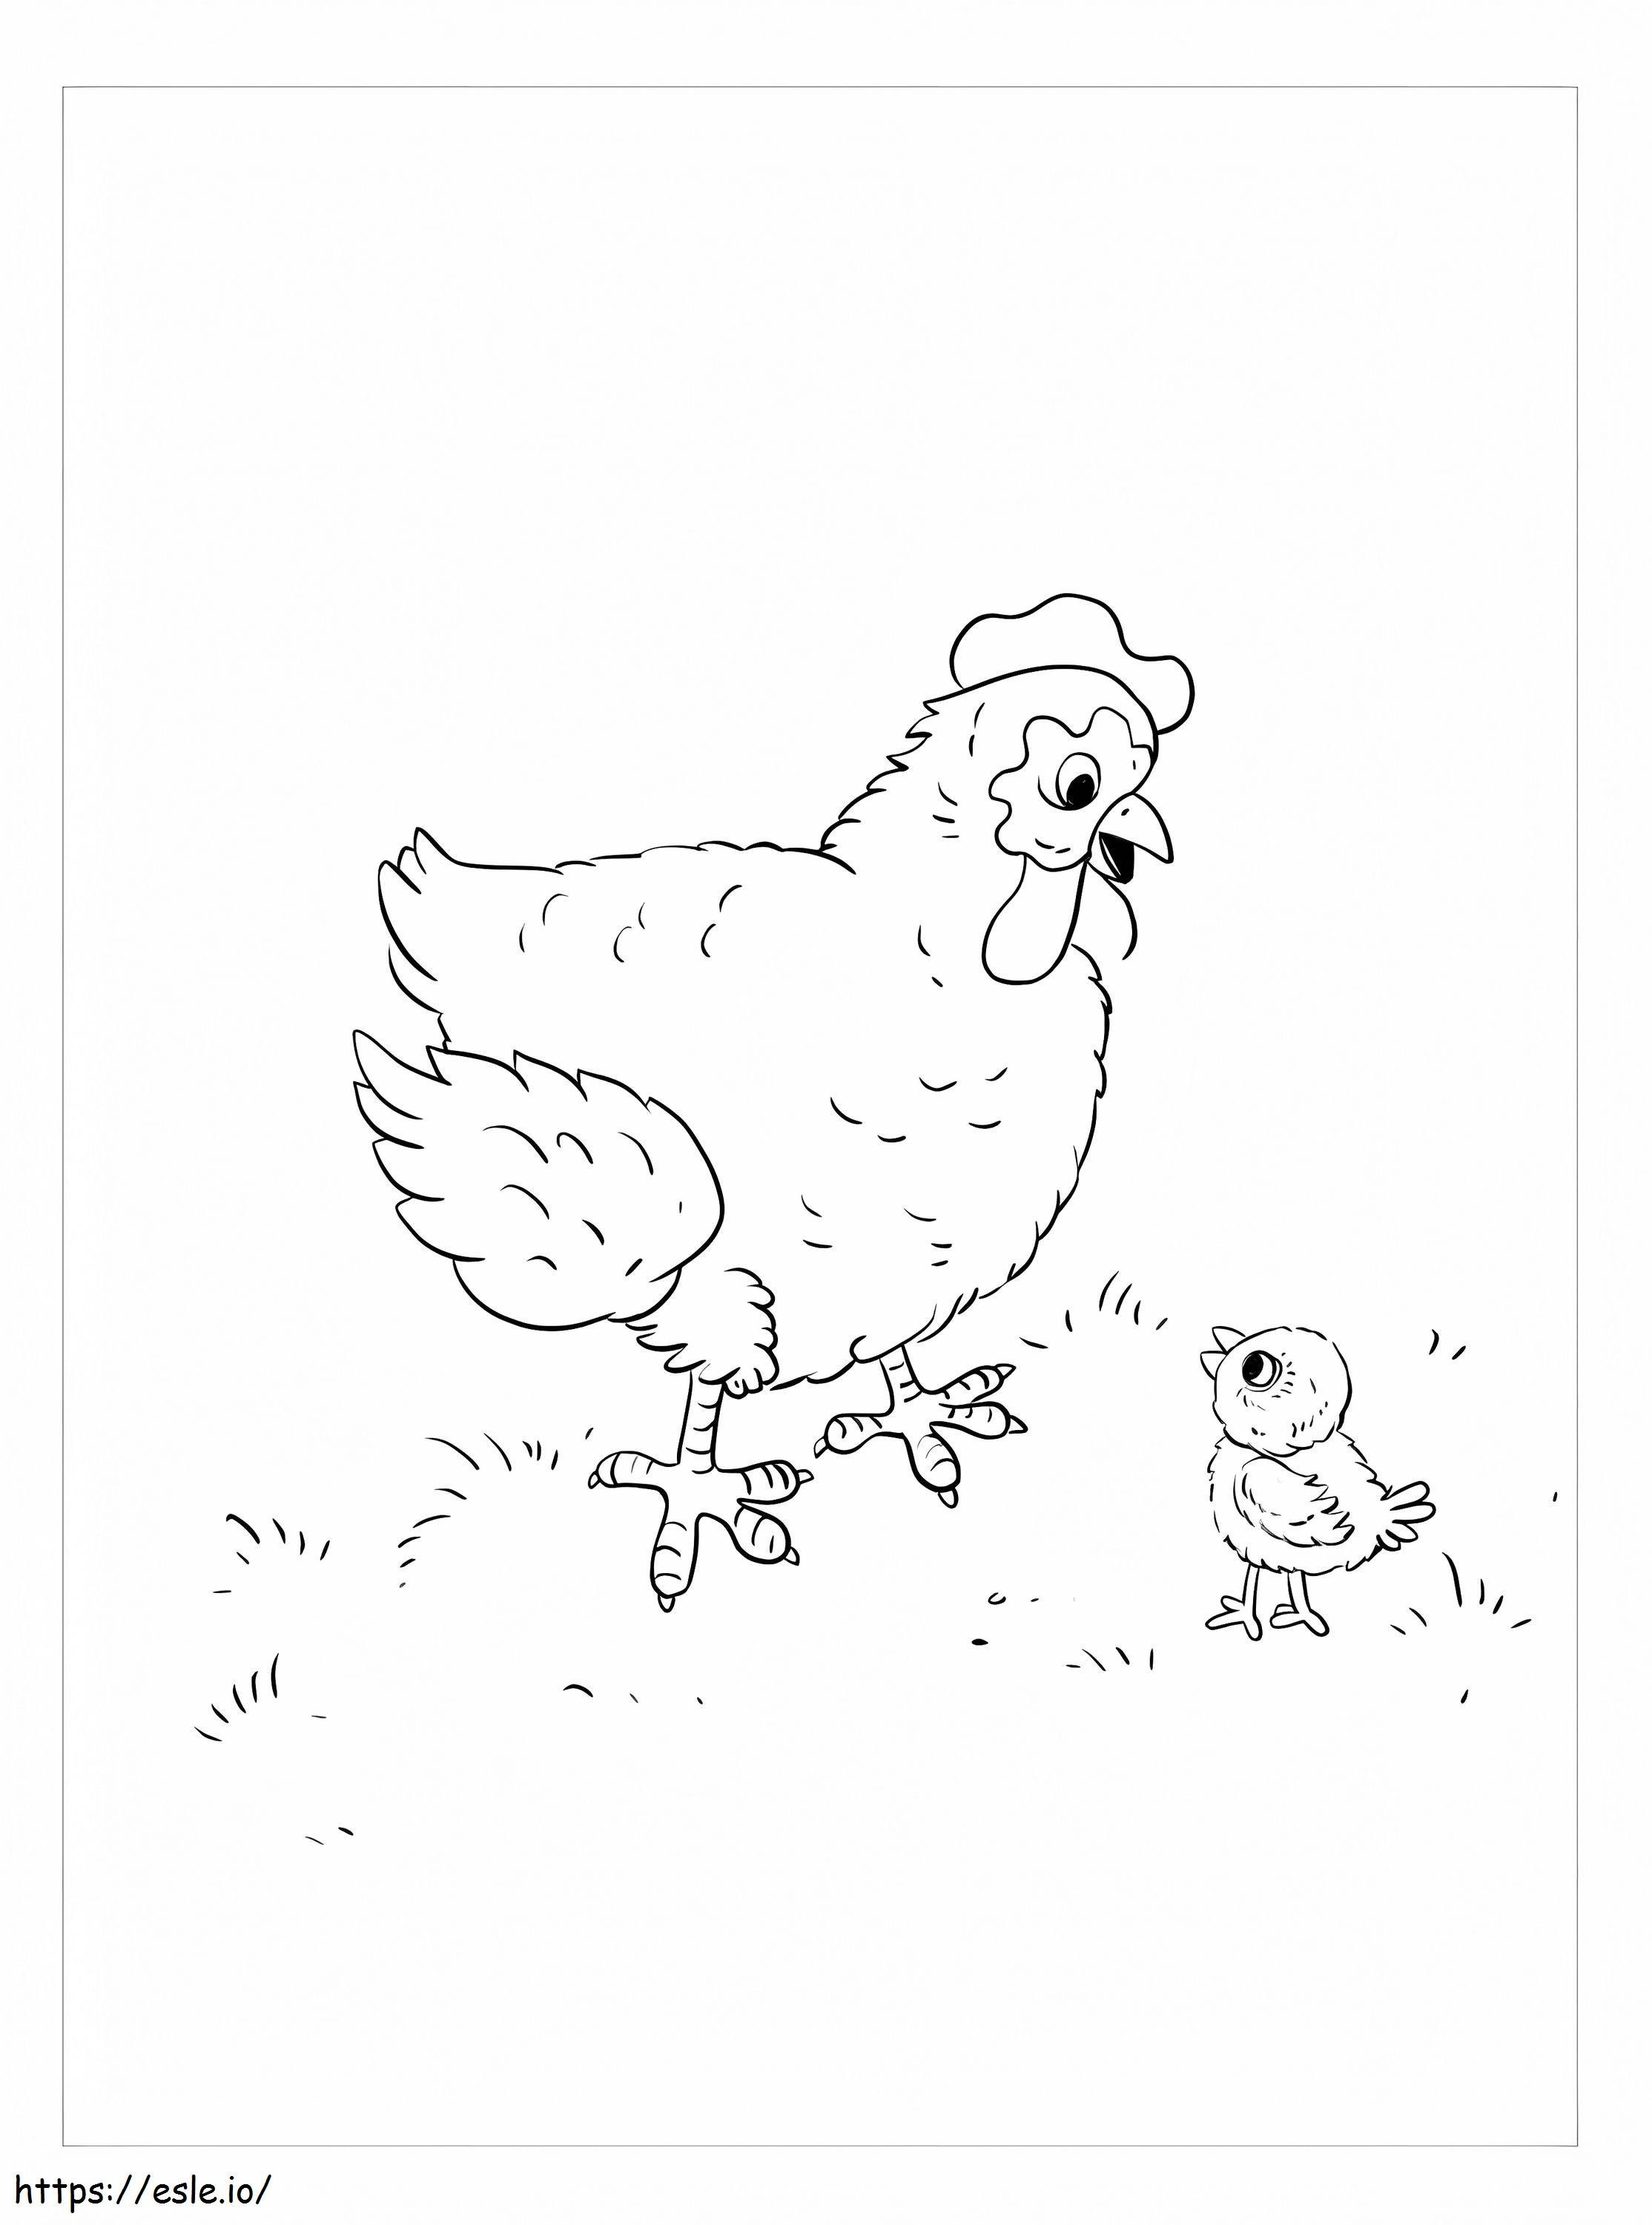 Rooster And Chick coloring page